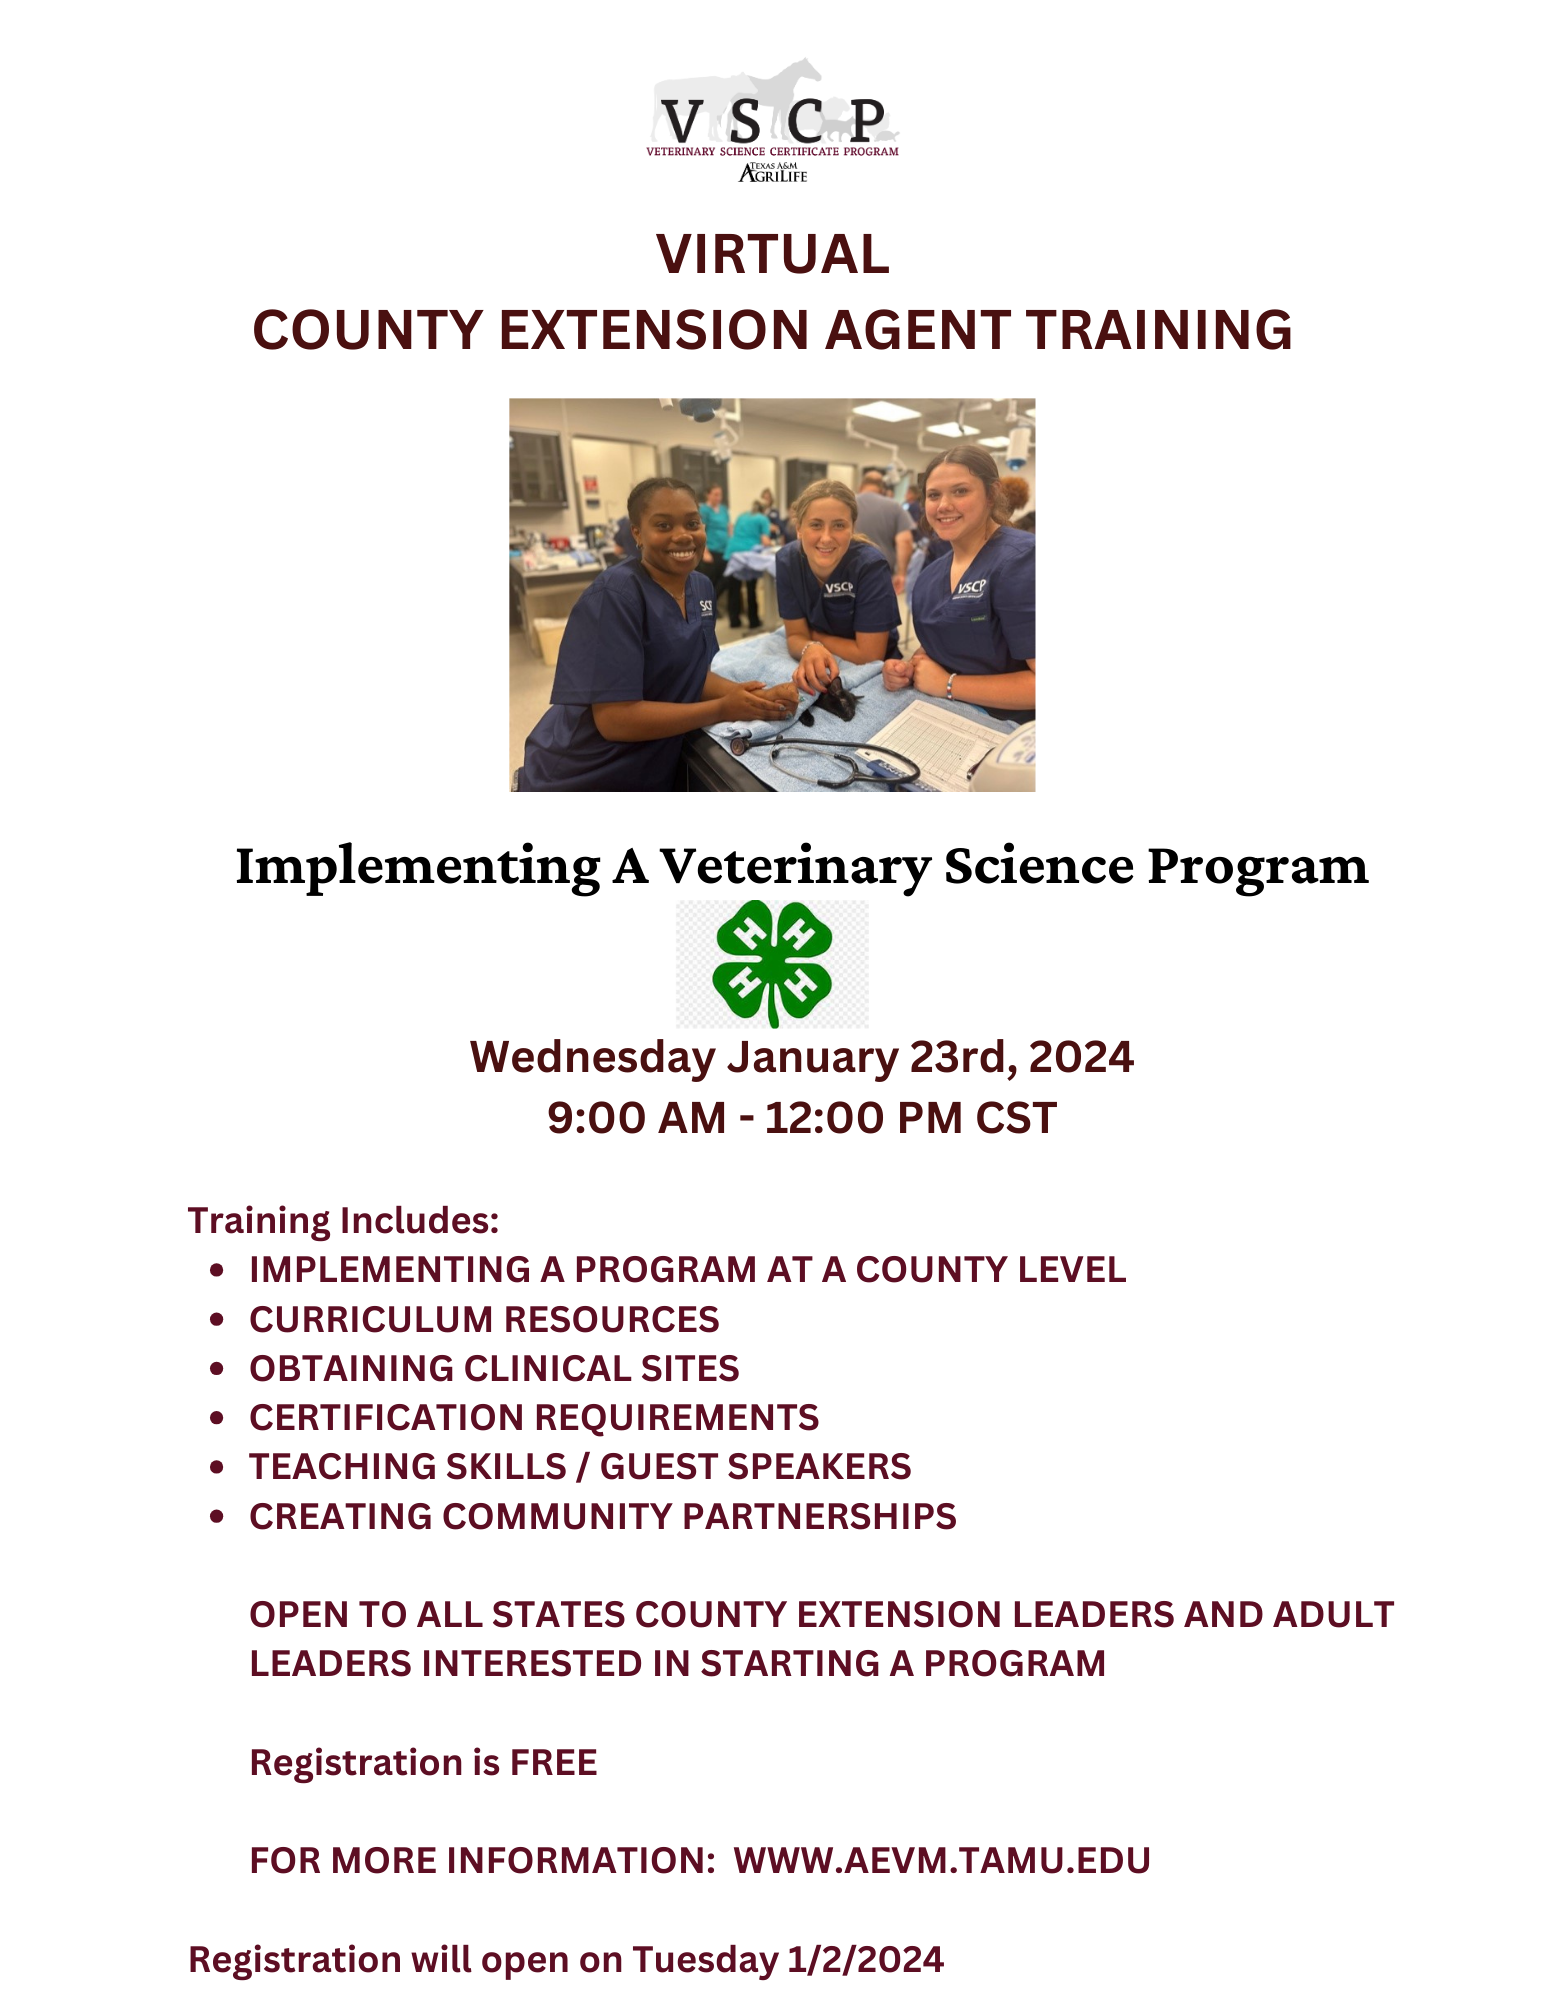 Wednesday January 23rd, 2024 900 AM – 1200 PM CST Training Includes IMPLEMENTING A PROGRAM AT A COUNTY LEVEL CURRICULUM RESOURCES OBTAINING CLINICAL SITES CERTIFICATION REQUIREMENTS TEACHING SKILL